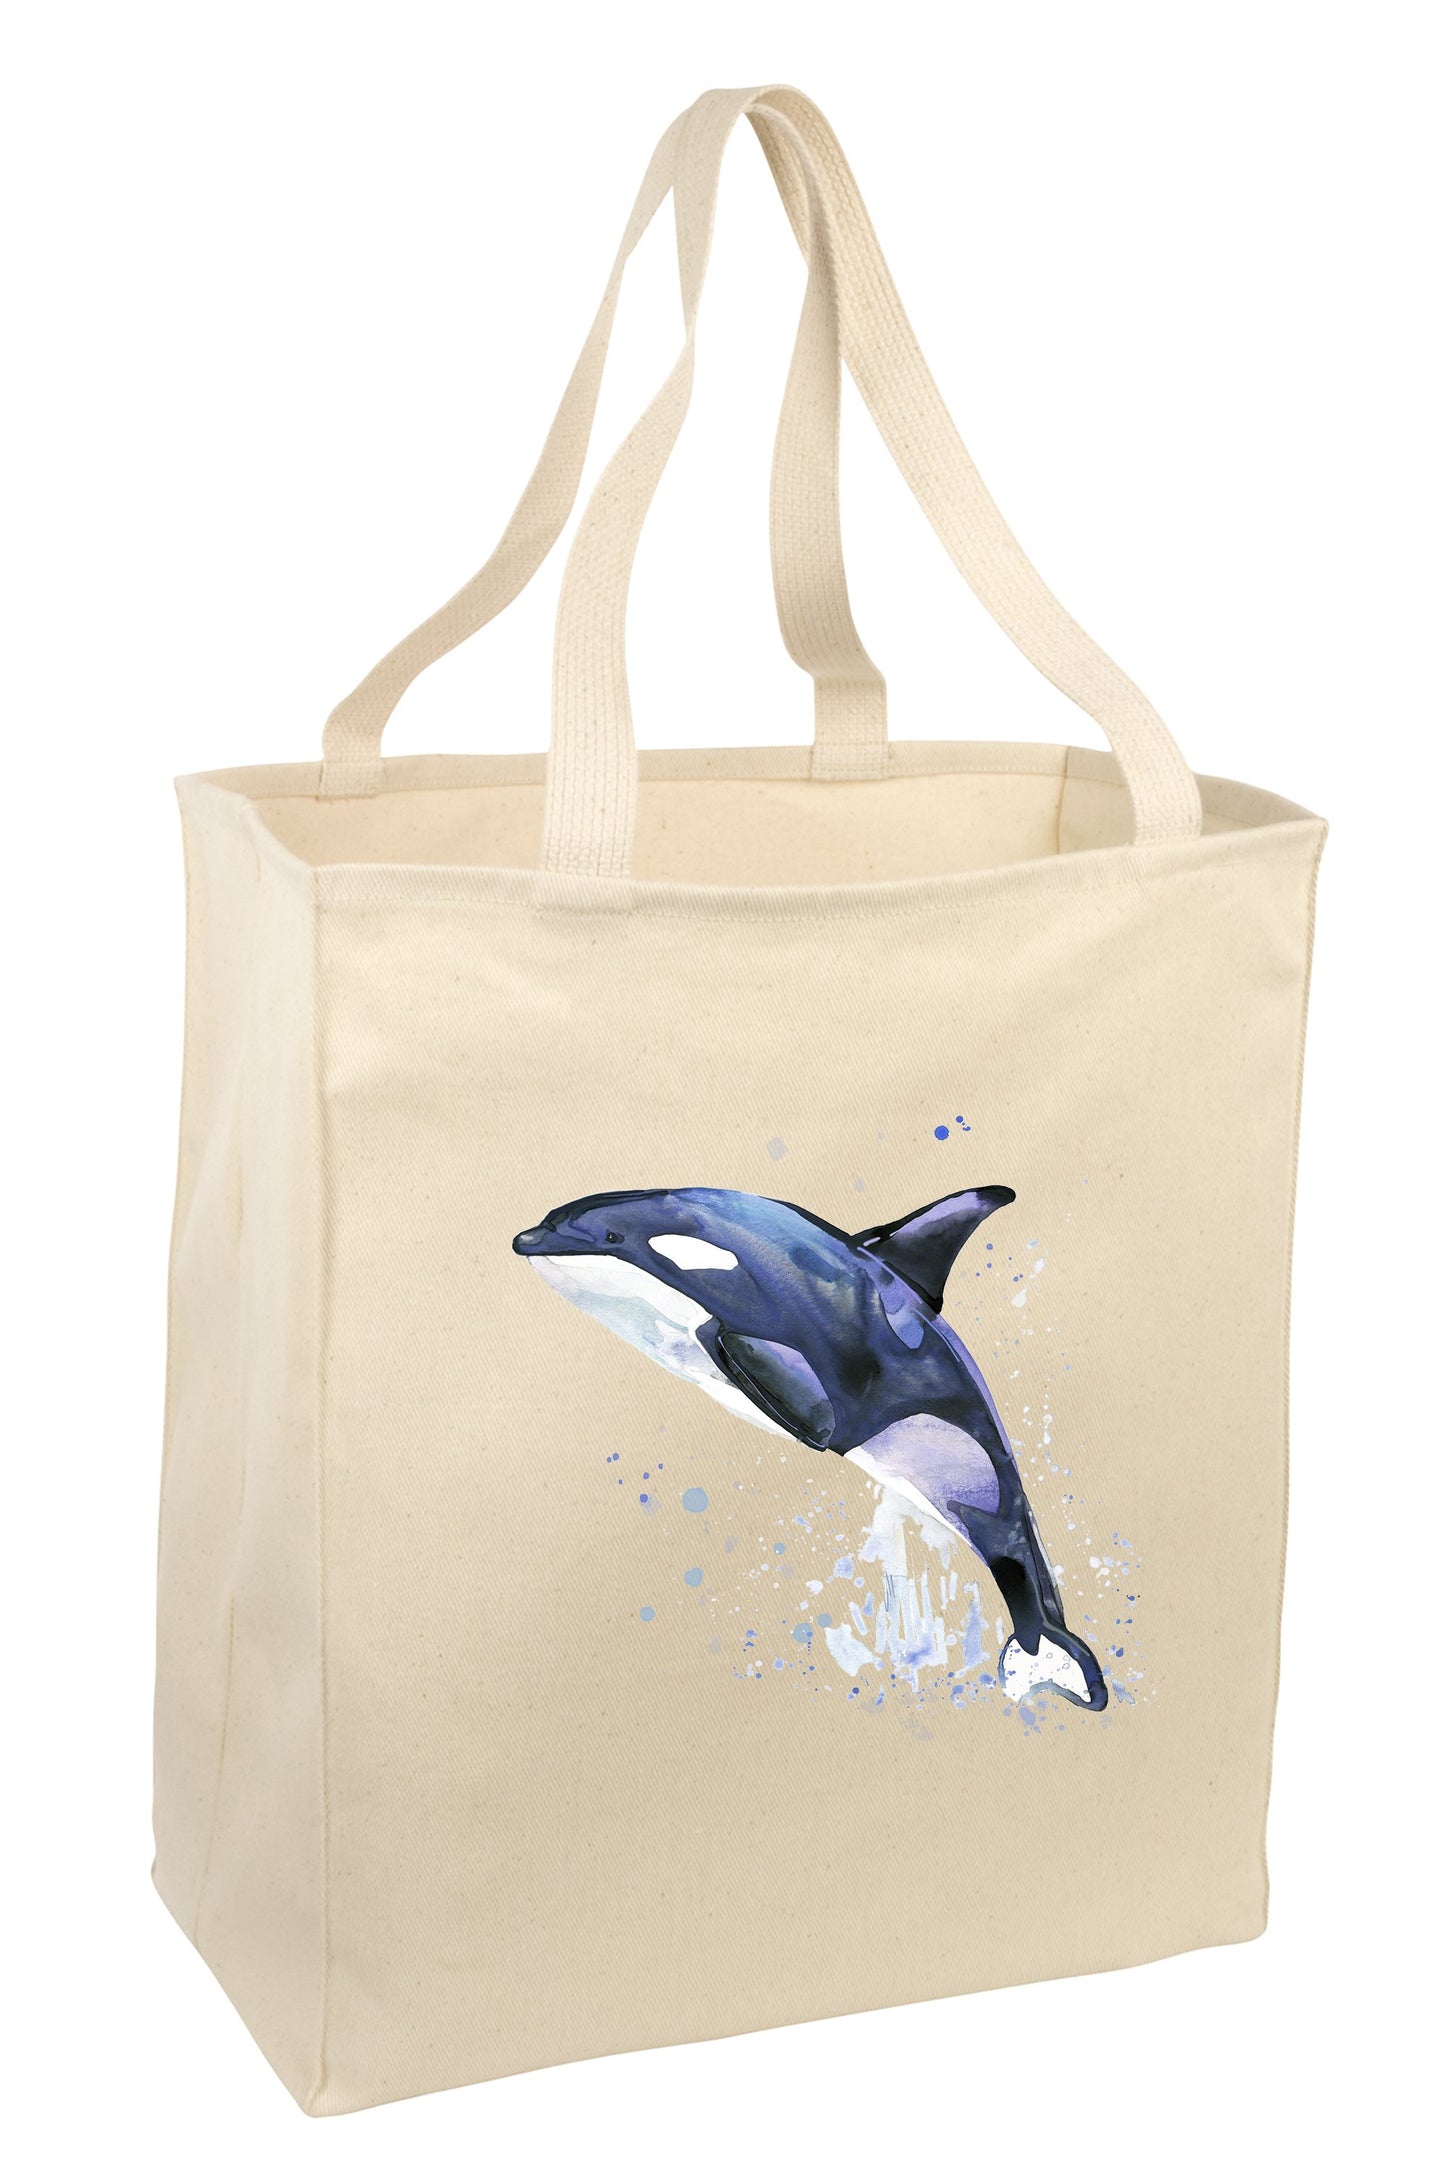 Over the Shoulder Beach Summer Tote Bag. Durable 100% Cotton and 22" Long Handle Shopping Bag. (Orca Whale)